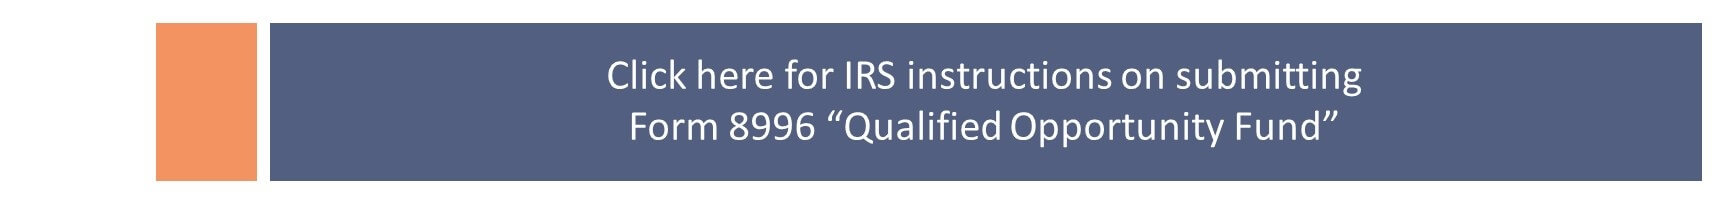 qualified-opportunity-fund-irs-form-8996-admiral-real-estate